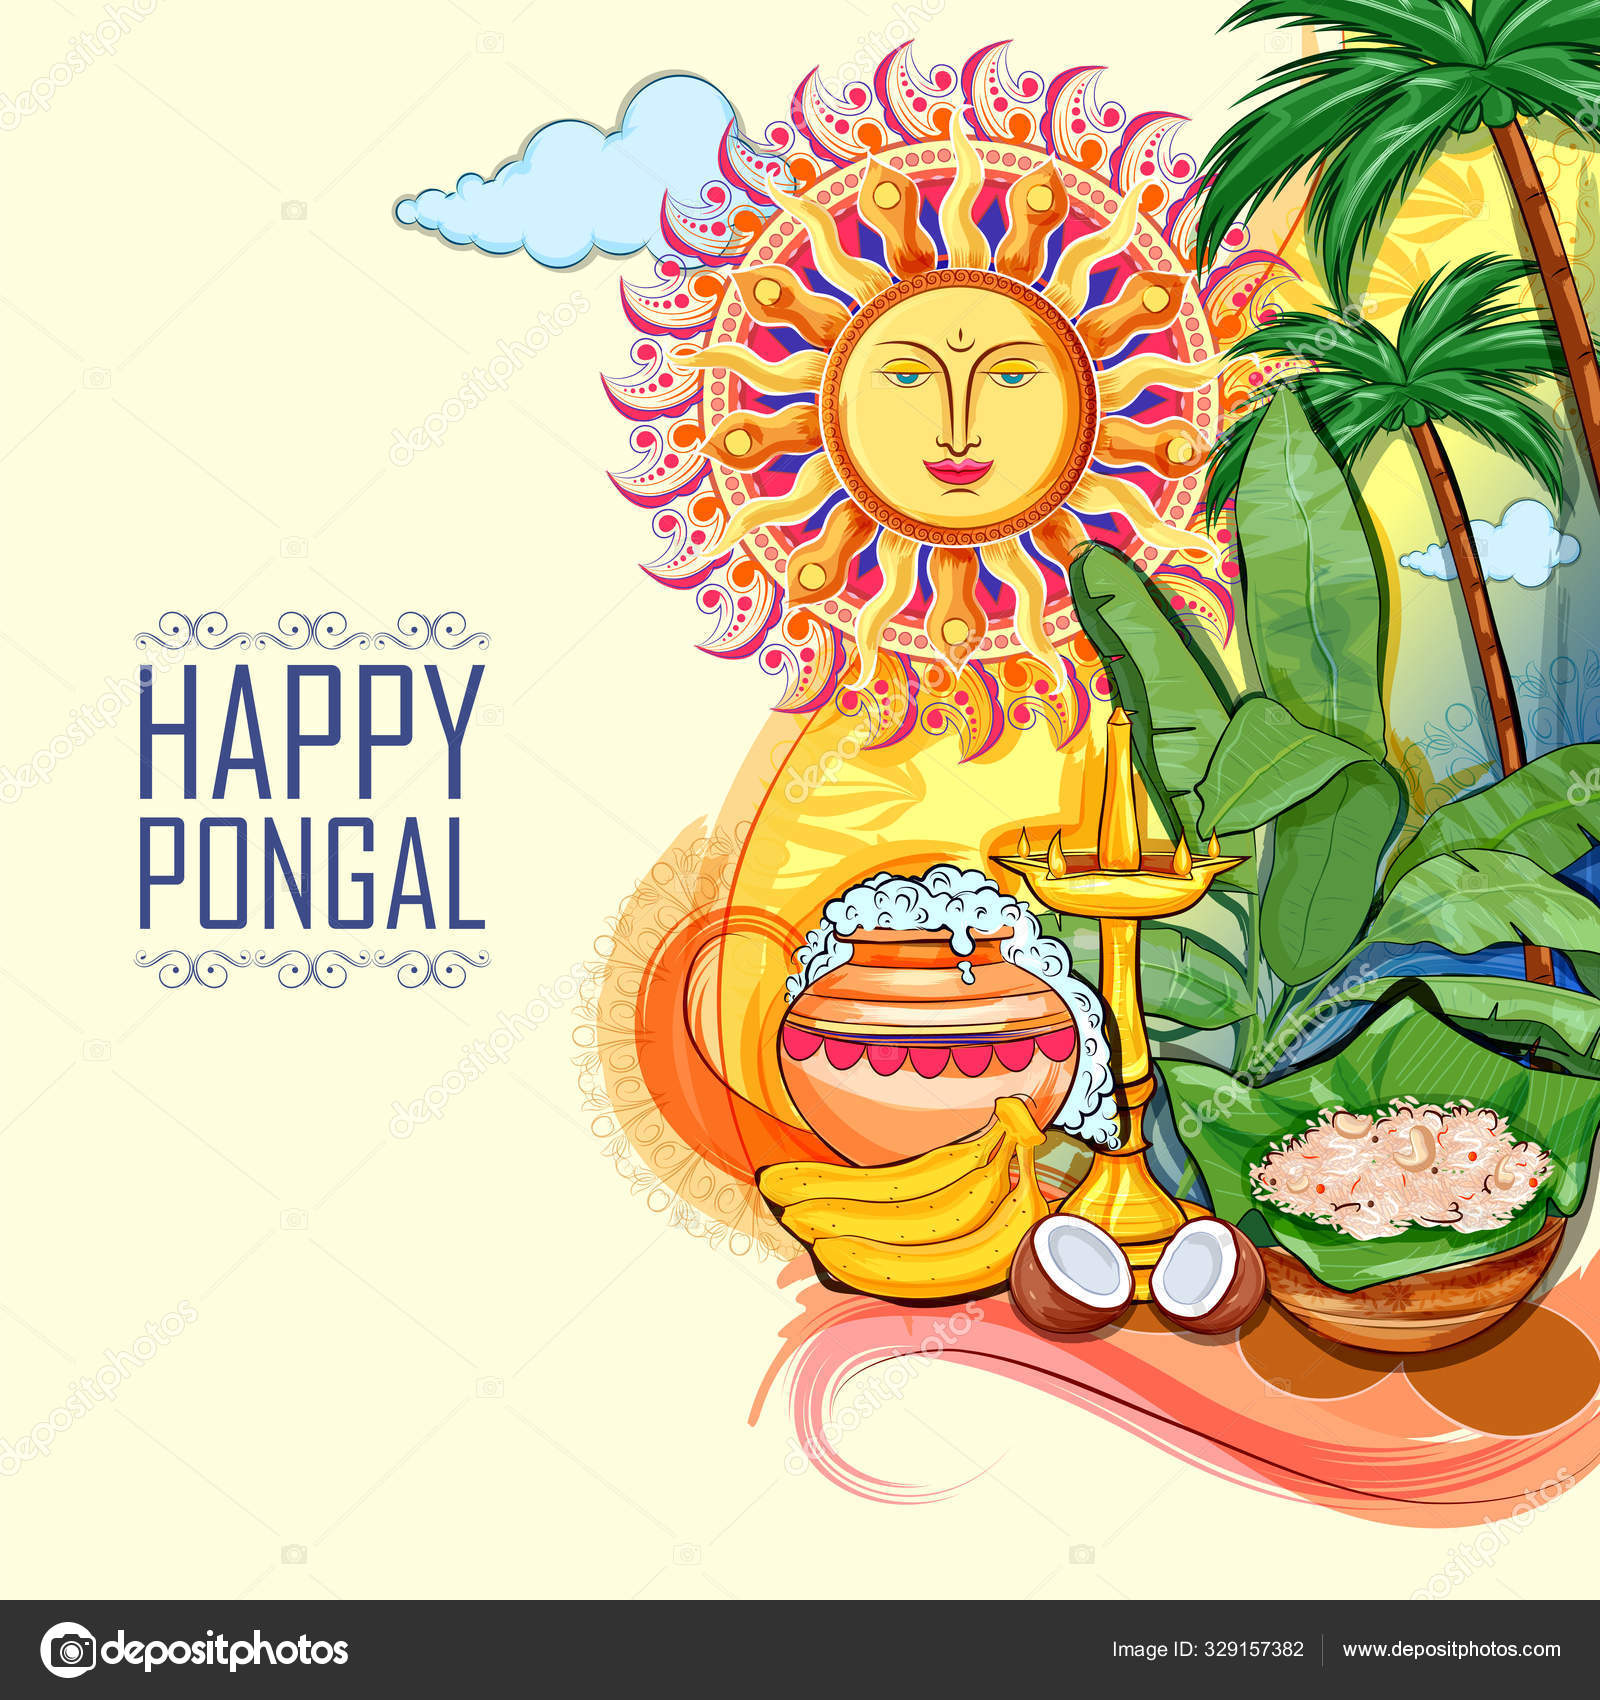 ART / DRAWING / ILLUSTRATION / PAINTING / SKETCHING - Anikartick: HAPPY  PONGAL 2014 Wishes to All - PONGAL GREETINGS and PONGAL WISHES to All -  Painting by Artist Anikartick,Chennai,Tamil Nadu,India